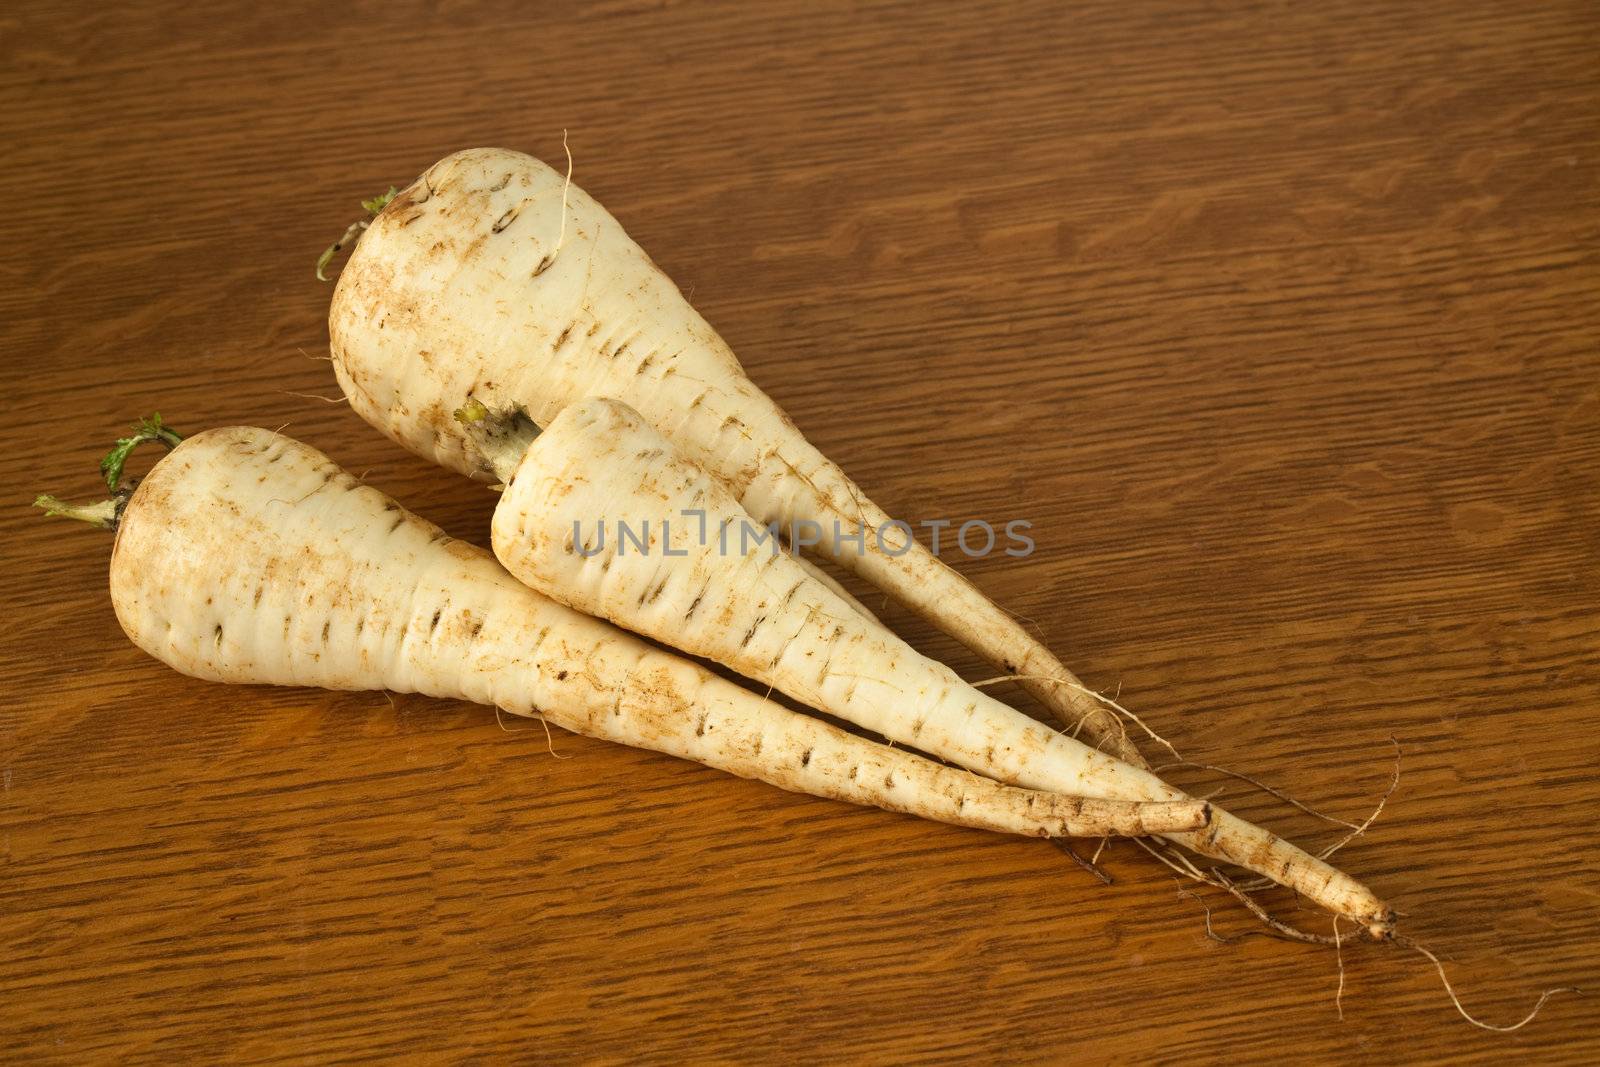 Three parsnips on a table ready to be prepared for a meal